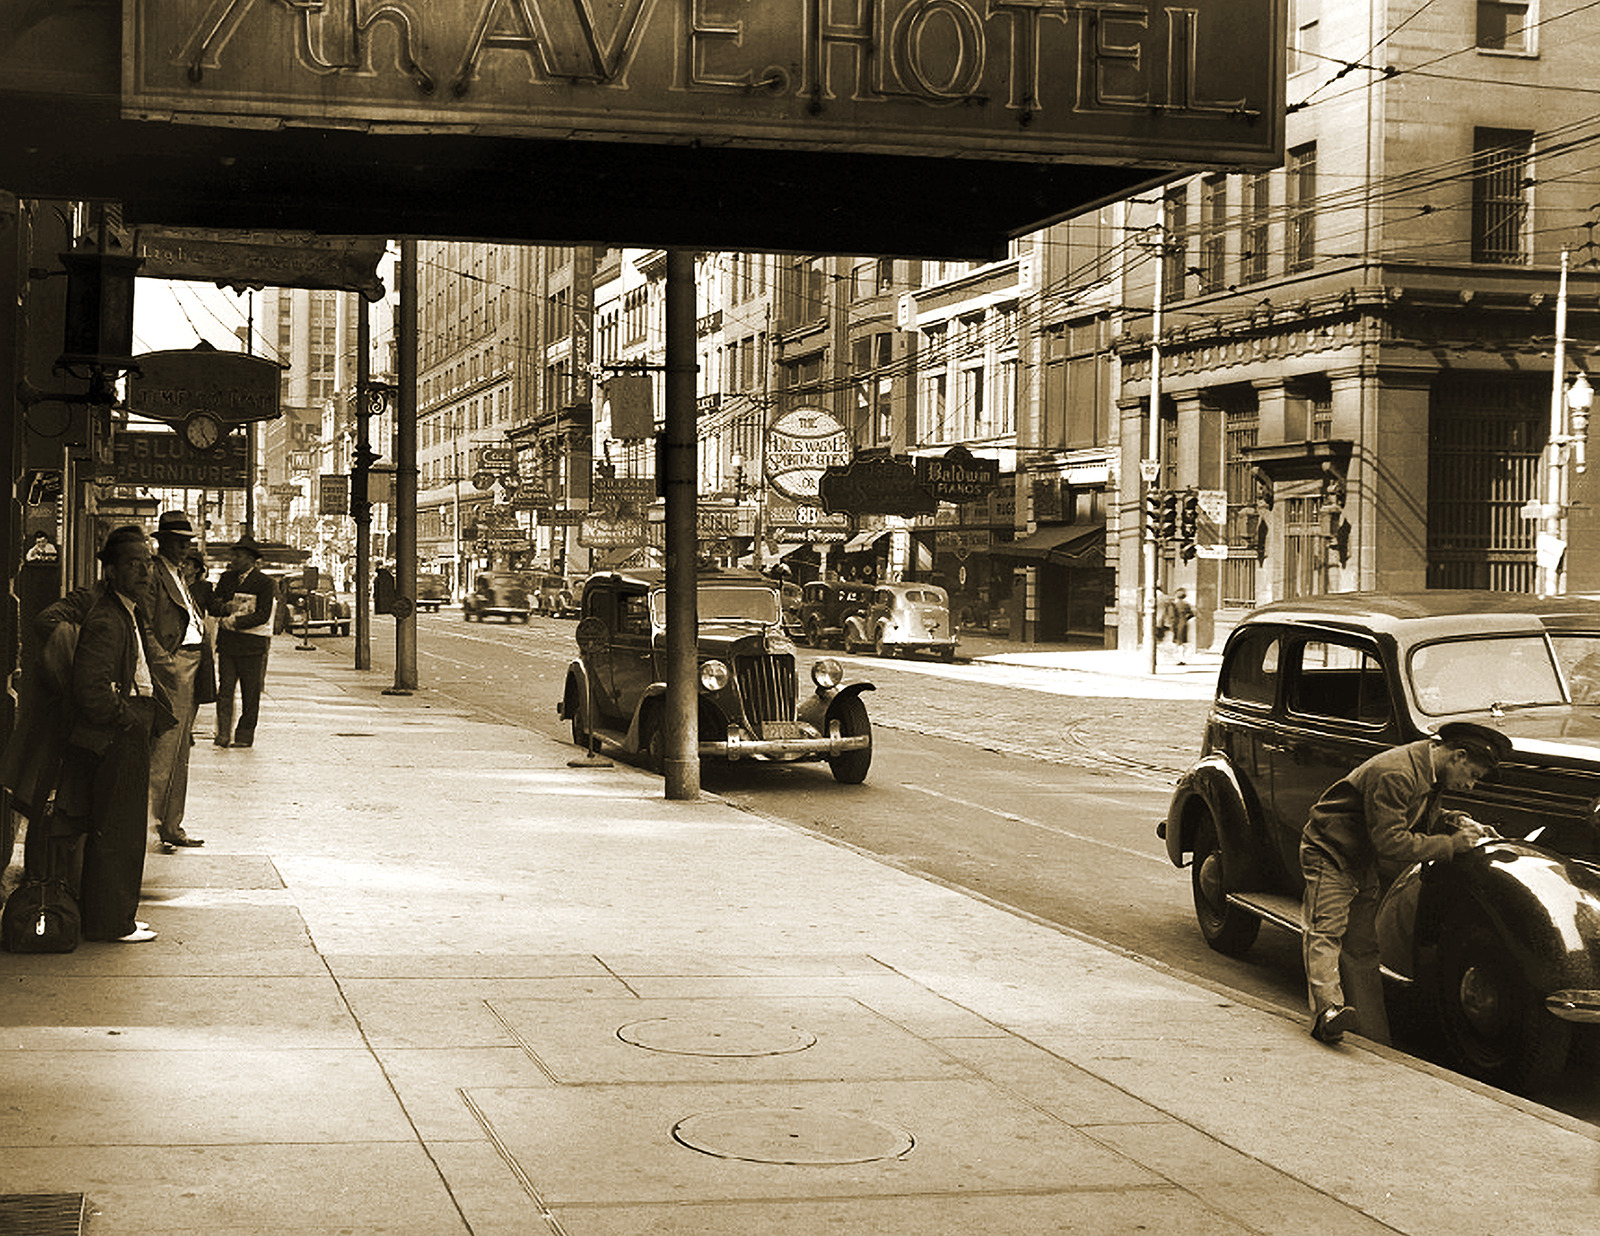 1938 Seventh Avenue Hotel, Pittsburgh, PA Old Photo 8.5\